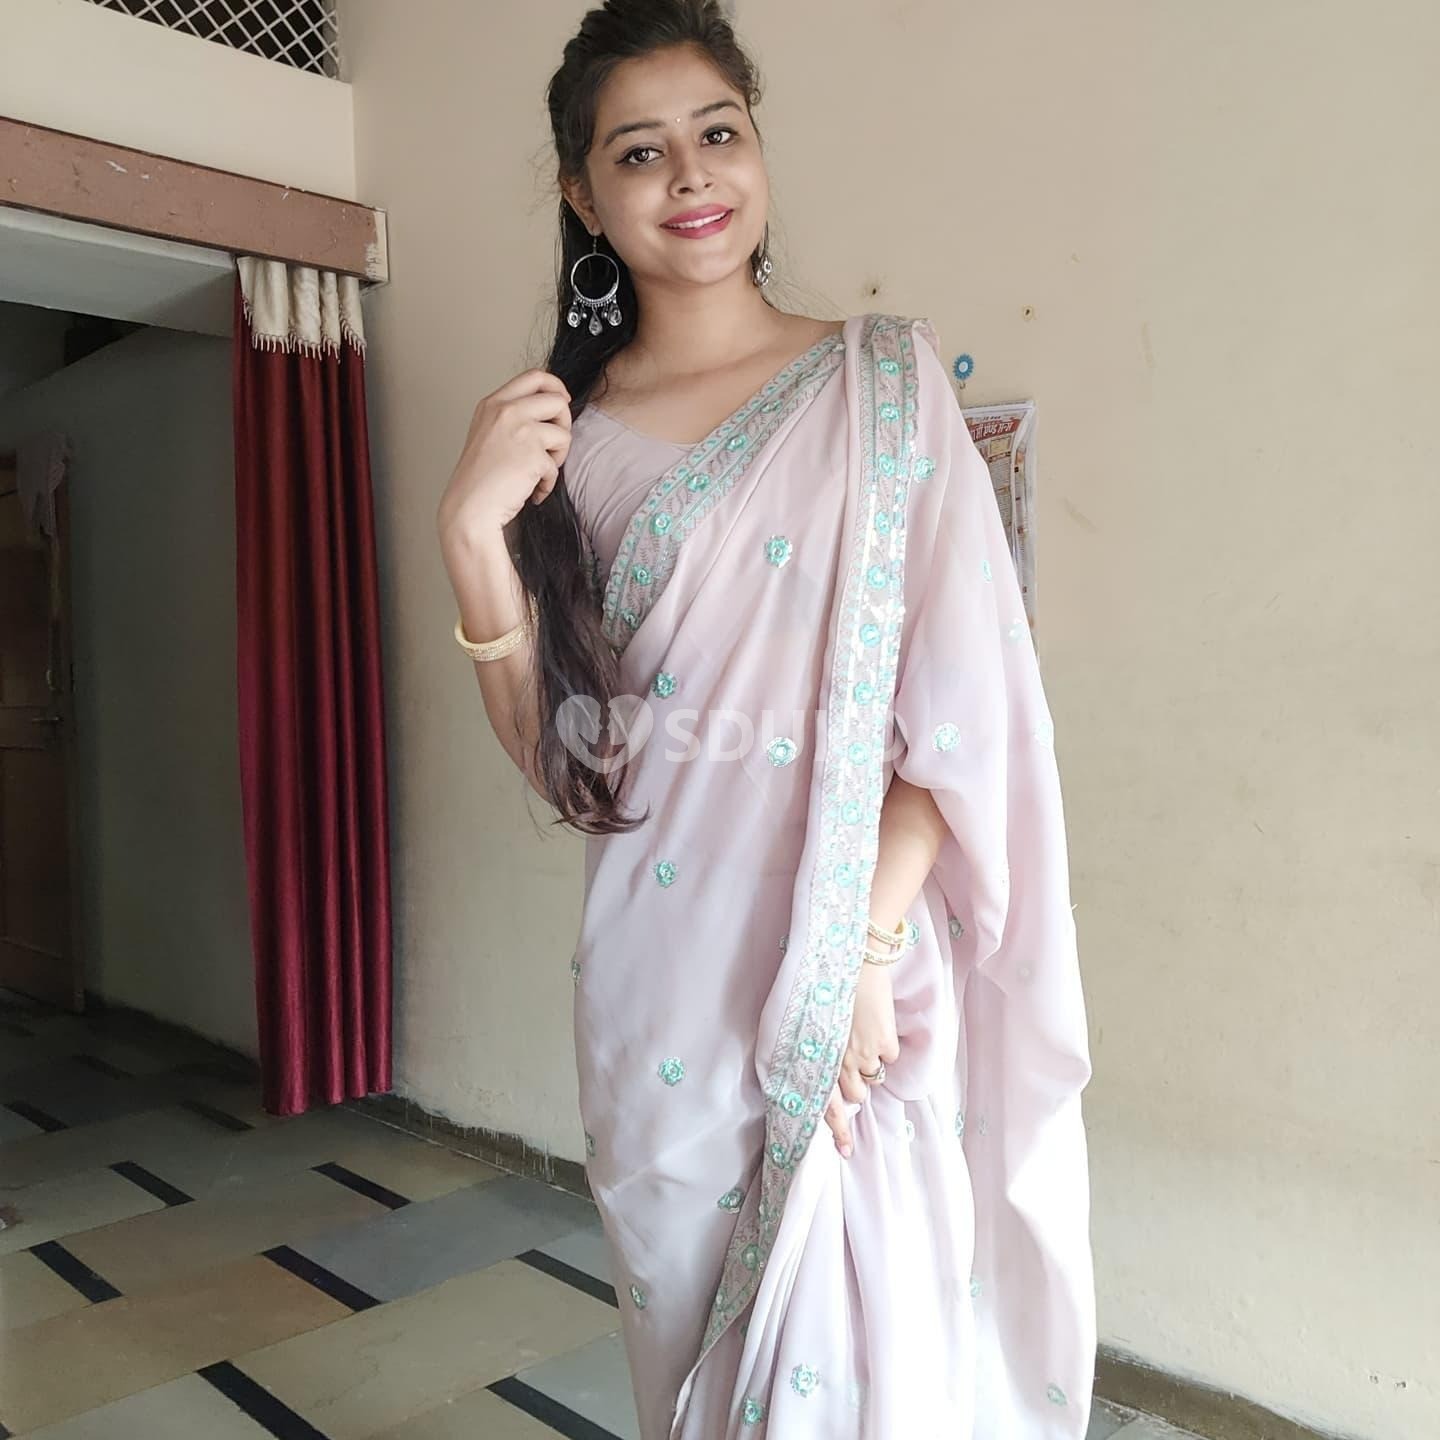 Vapi call girl service 24 hours available genuine service